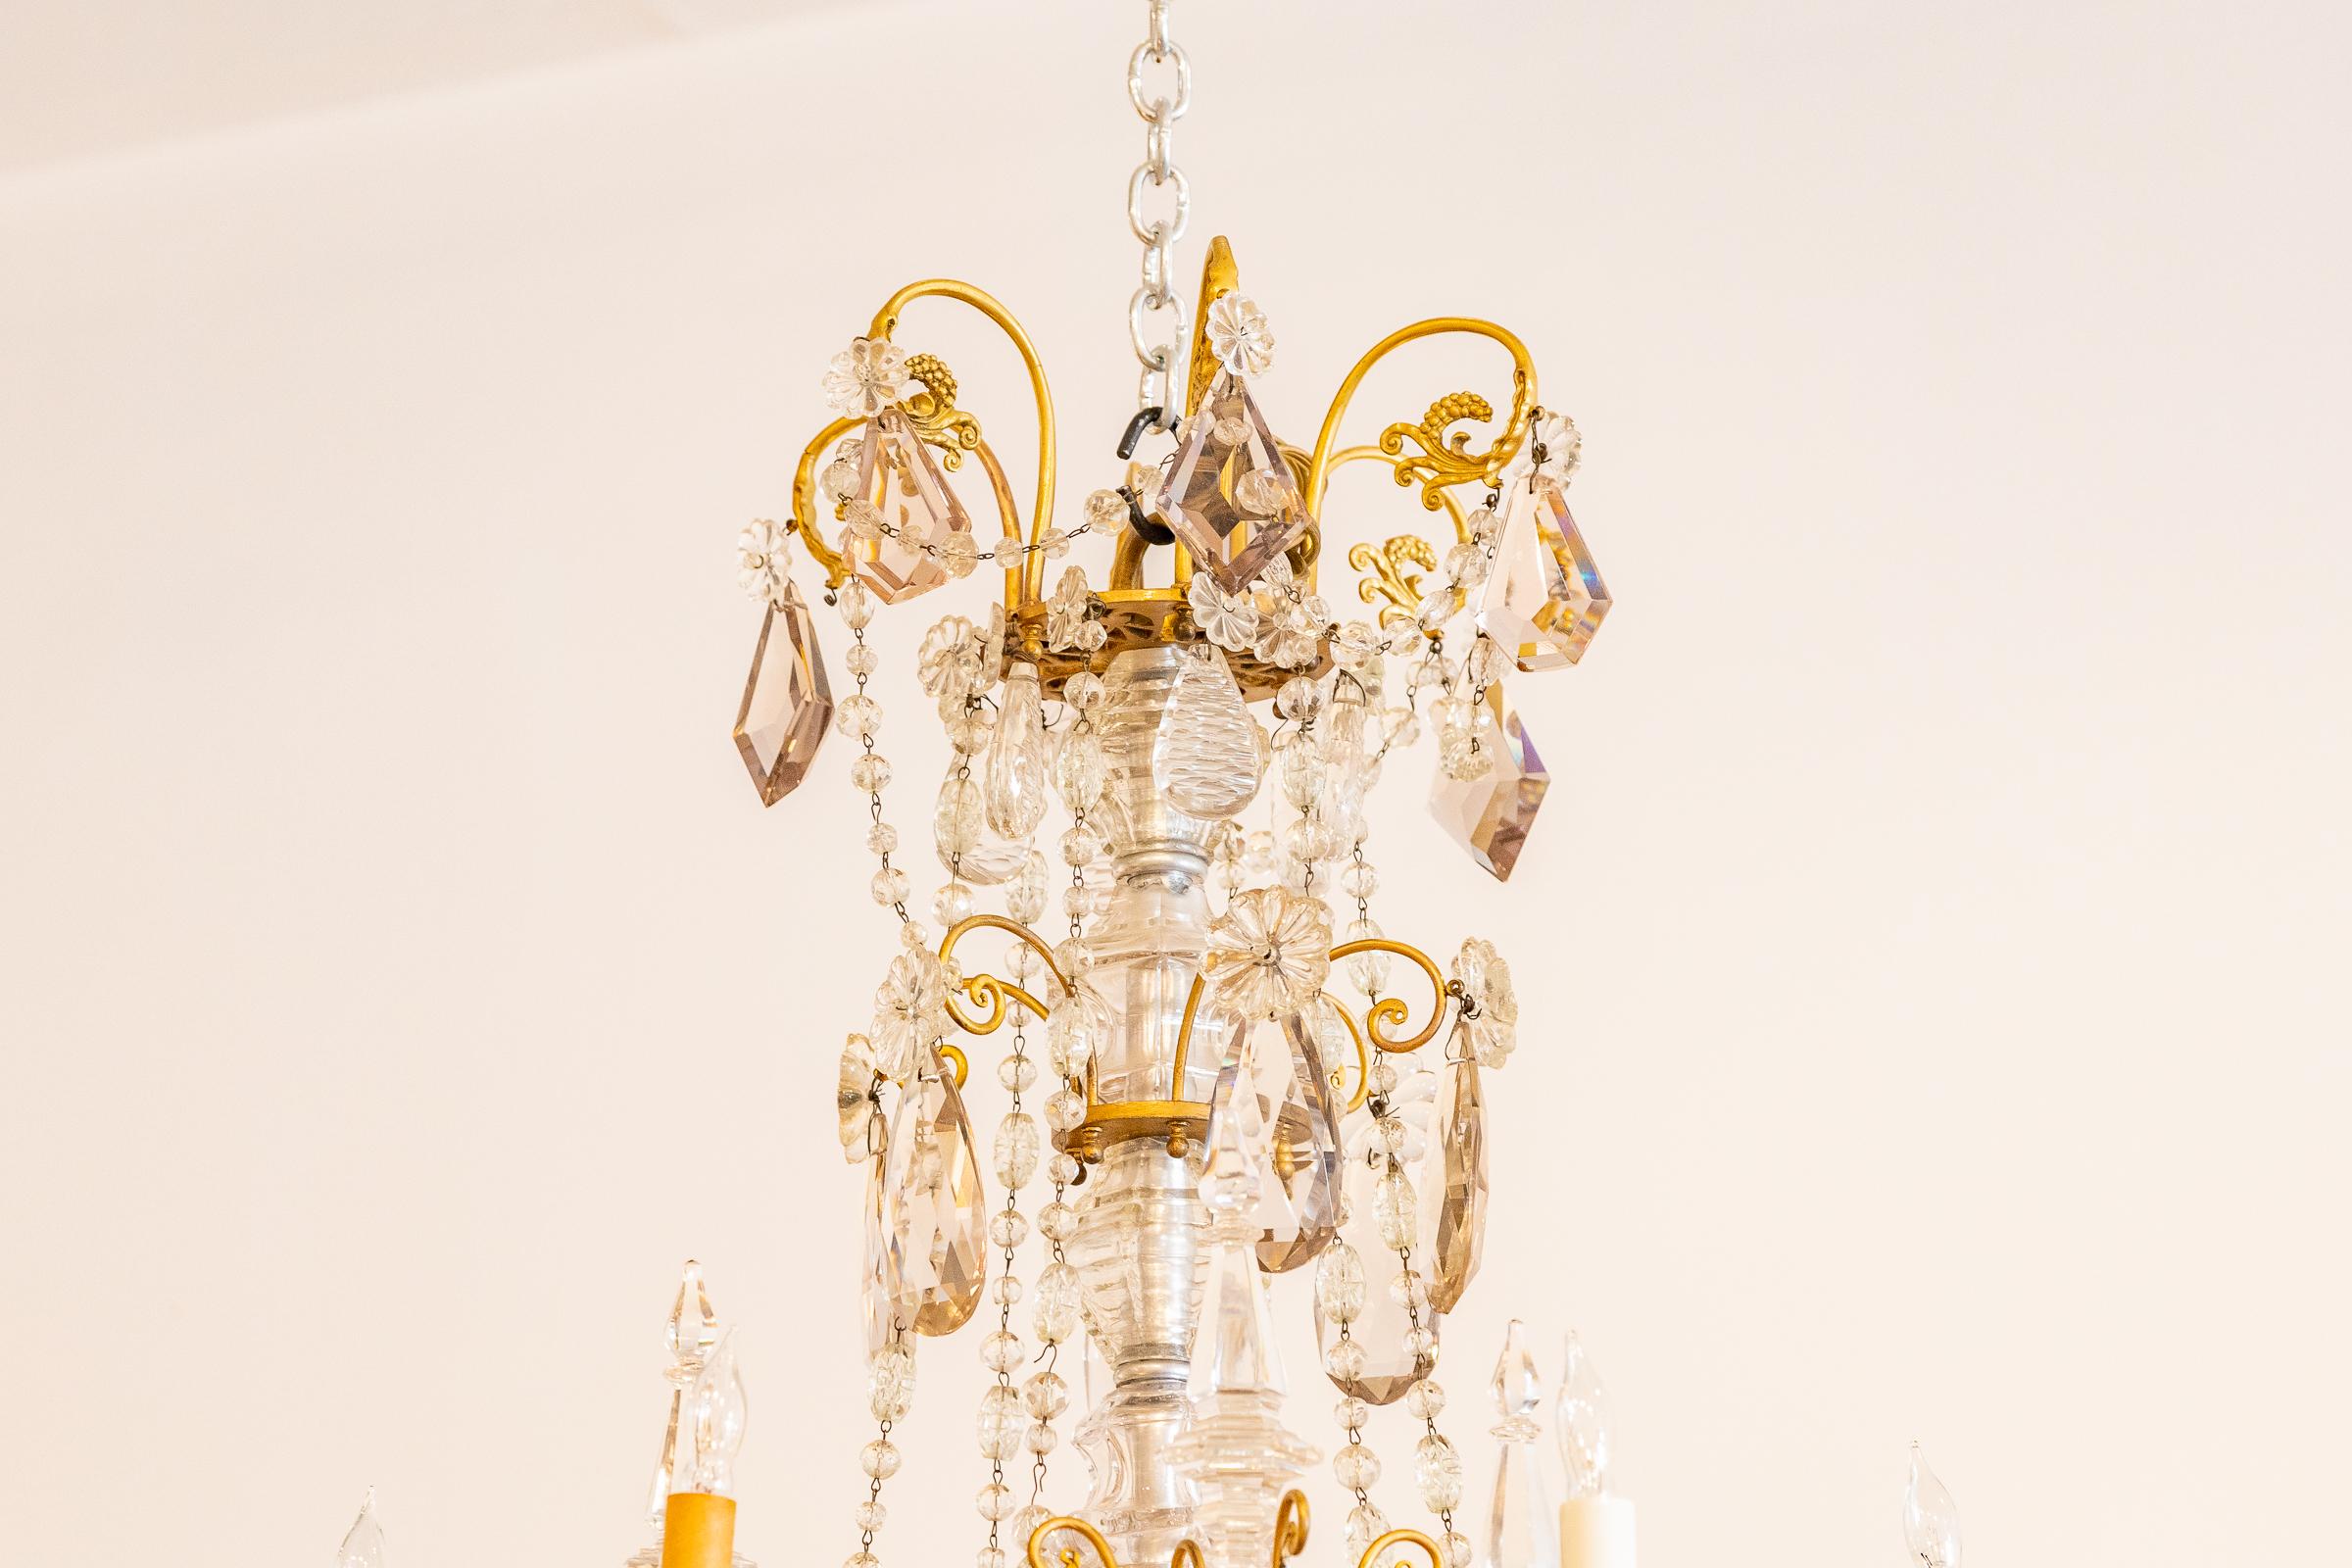 A fine 19th century 6 light Louis XV gilt bronze and rock crystal chandelier.